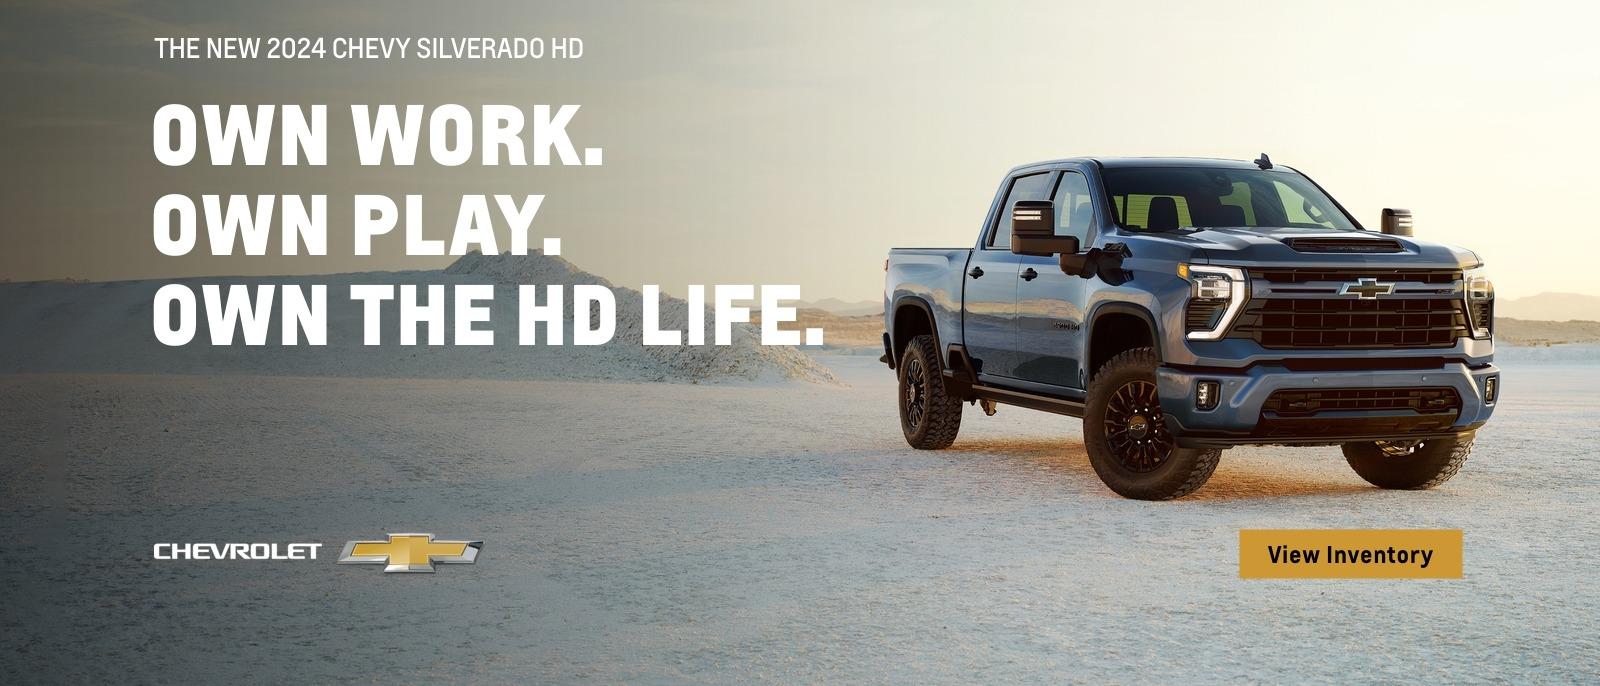 The new 2024 Chevy Silverado HD. Own the HD life.